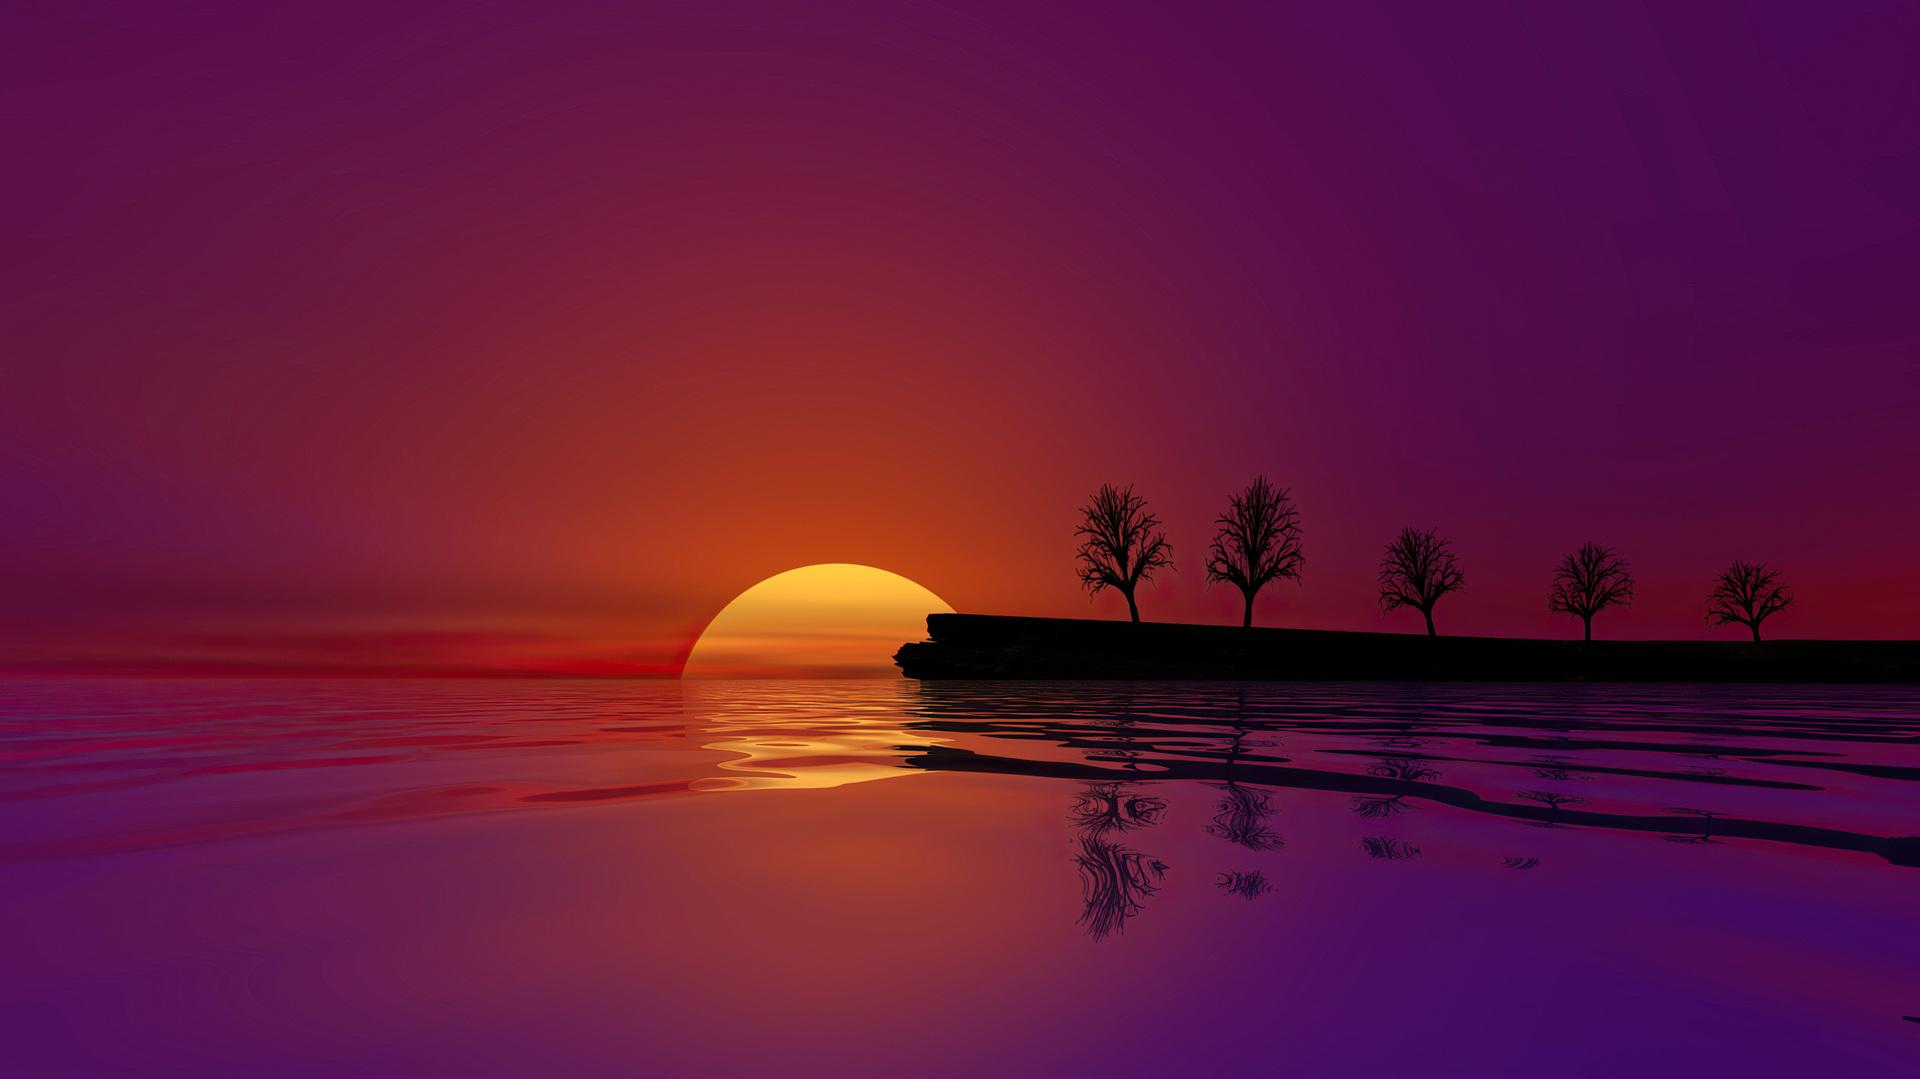 Waterscape Sunset Abstract HD Wallpaper Eyecandy For Your Xfce